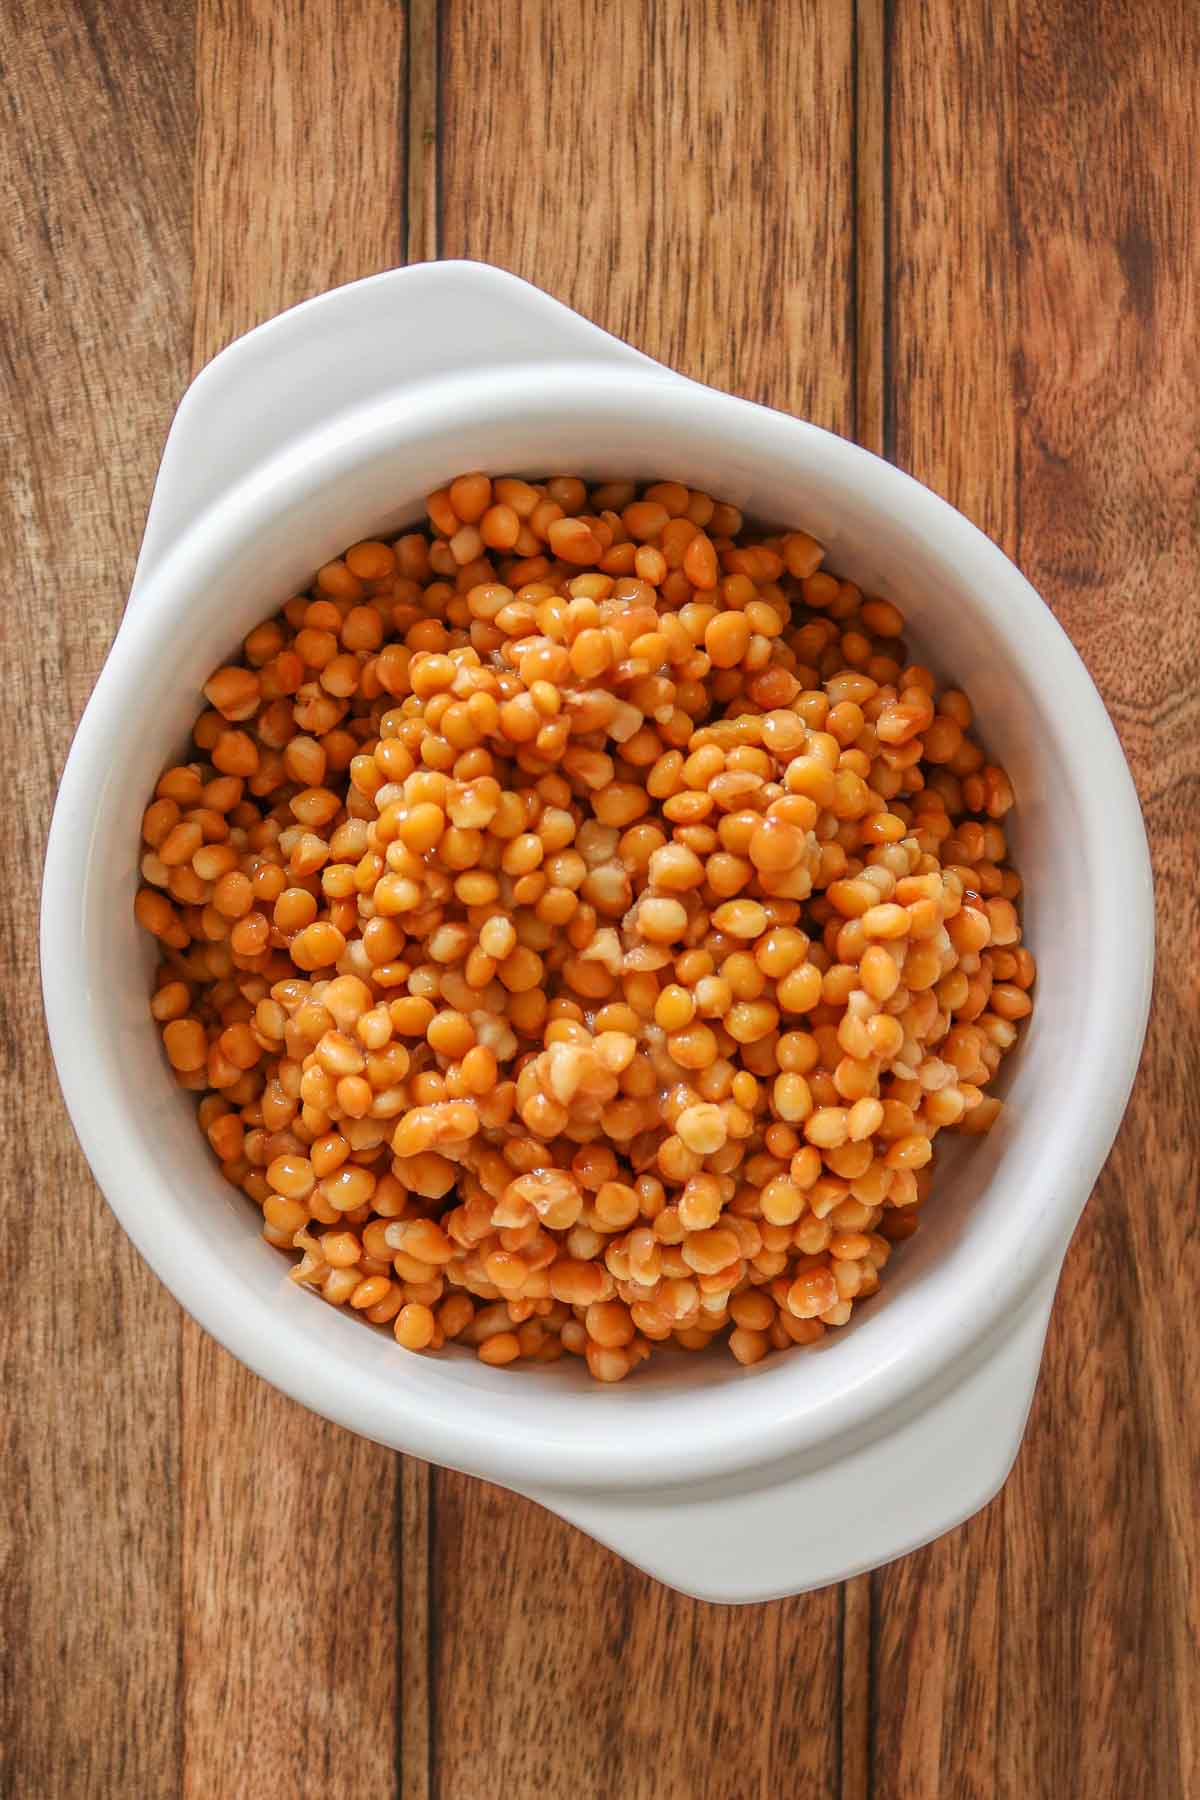 Canned lentils in a bowl.